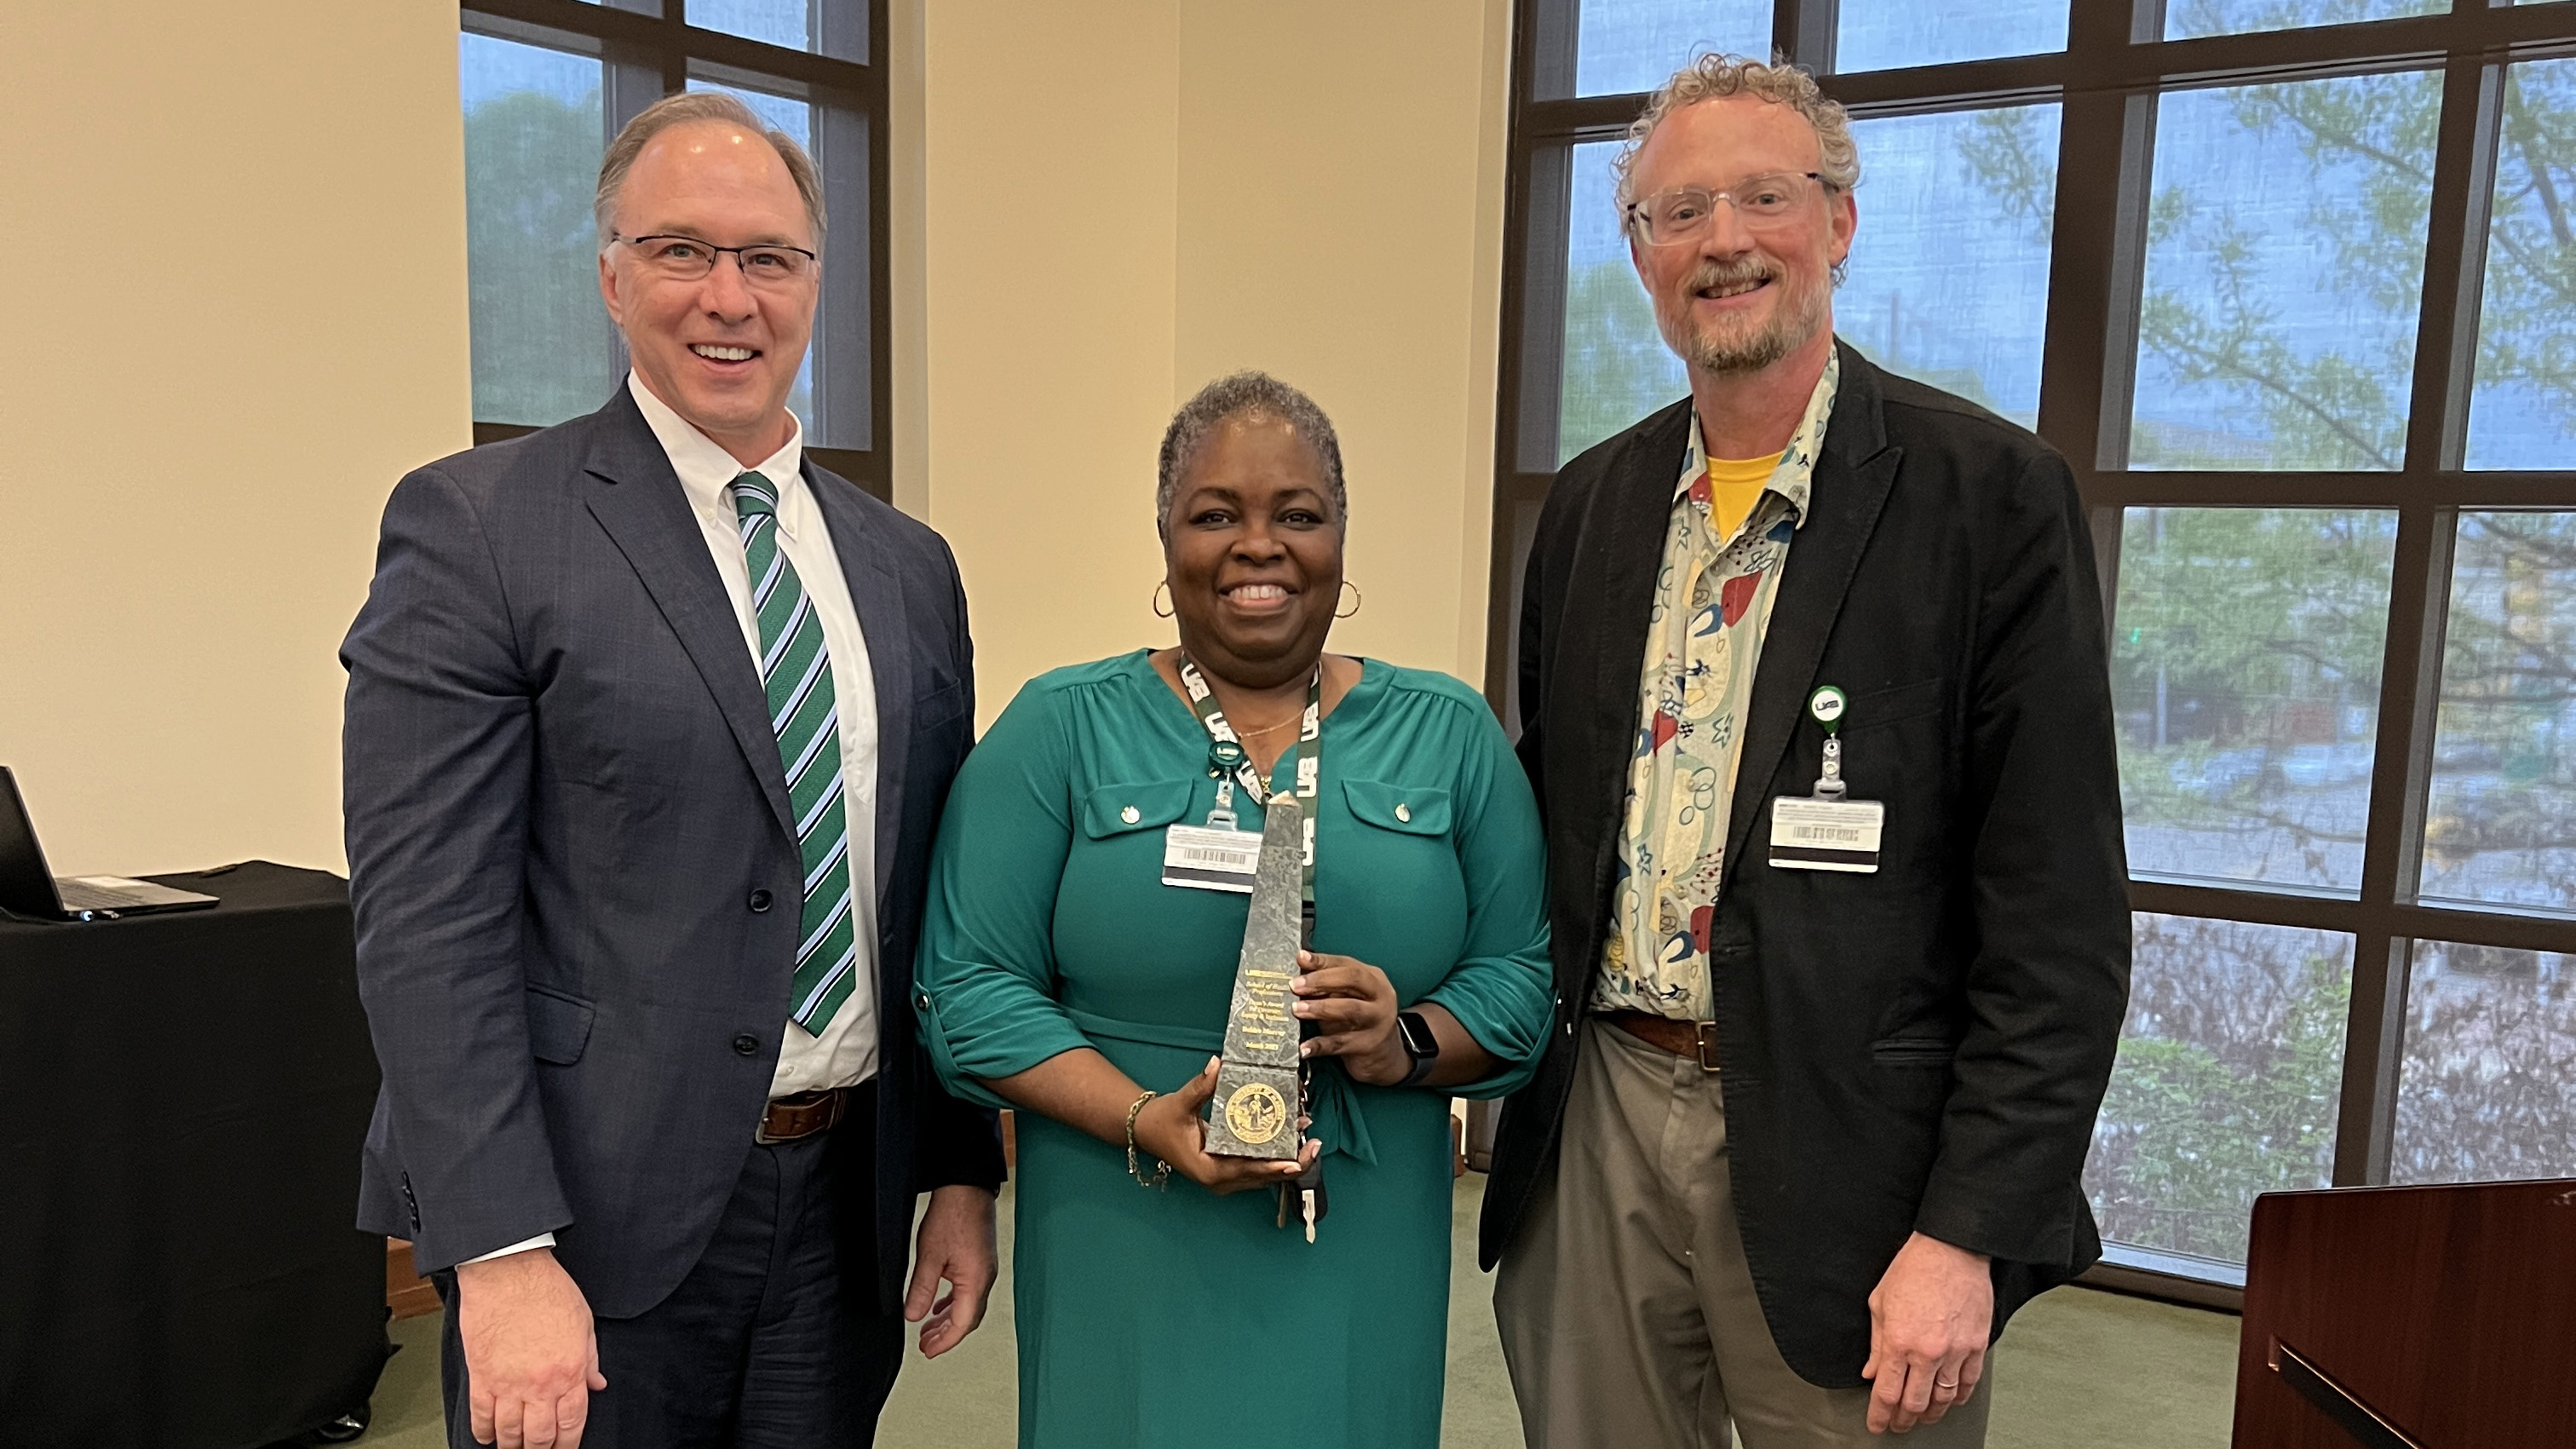 Dean's Award for Diversity, Equity, and Inclusion - Staff: Deidre Murray, Nutrition Sciences